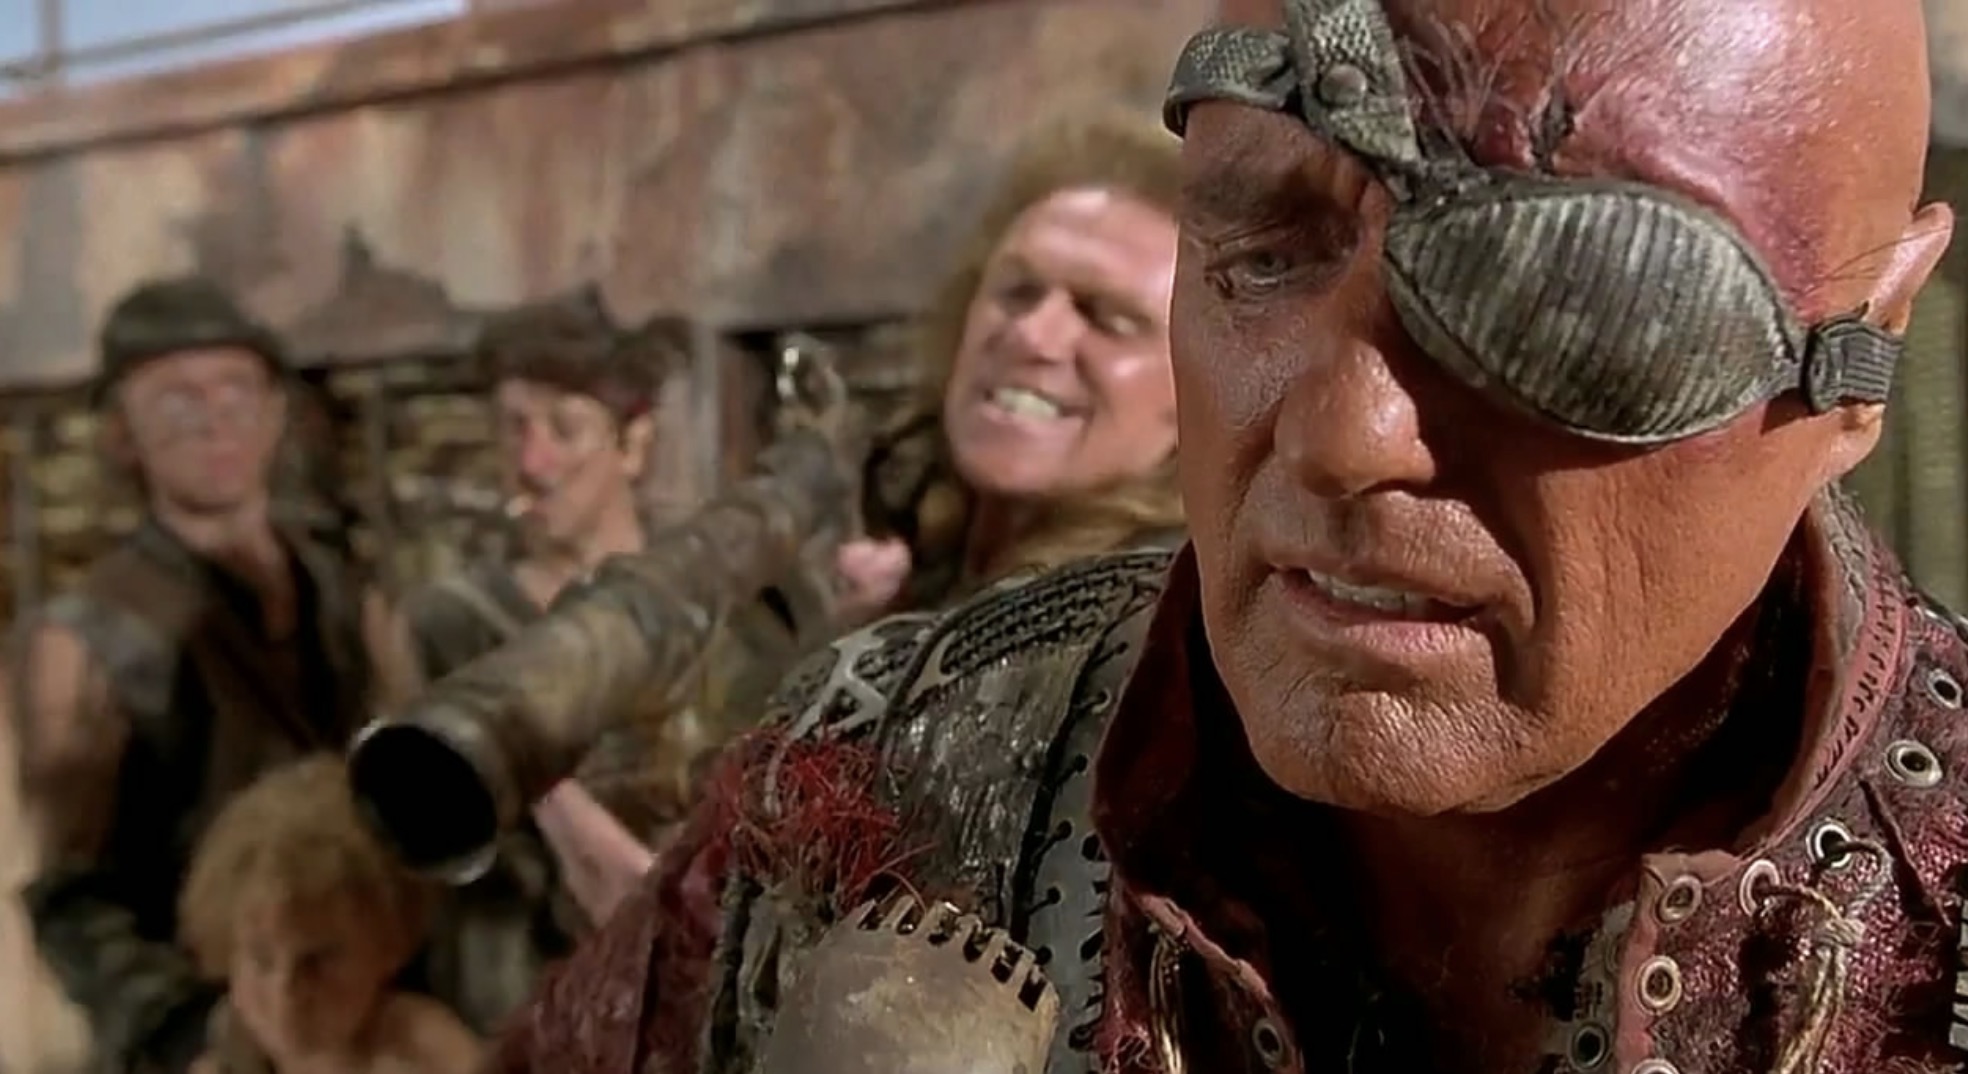 Waterworld Is Both More Impressive And Problematic Than You Remember